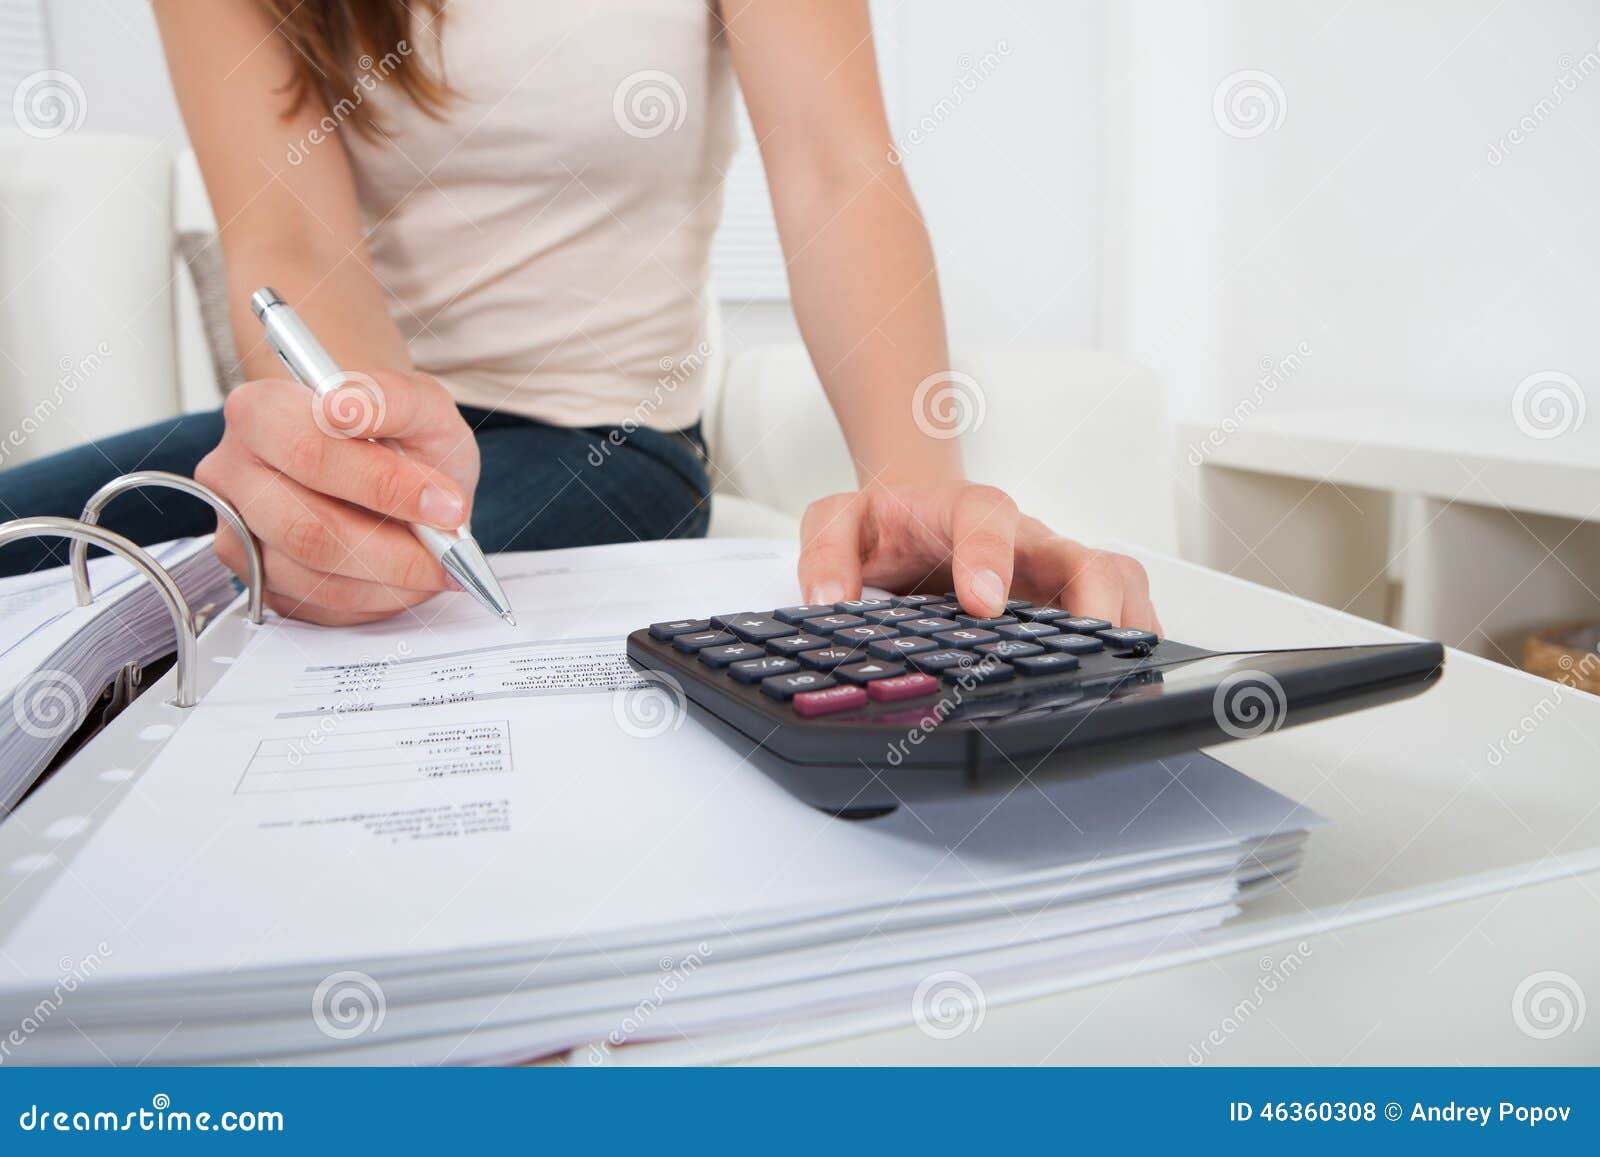 woman calculating home finances at table